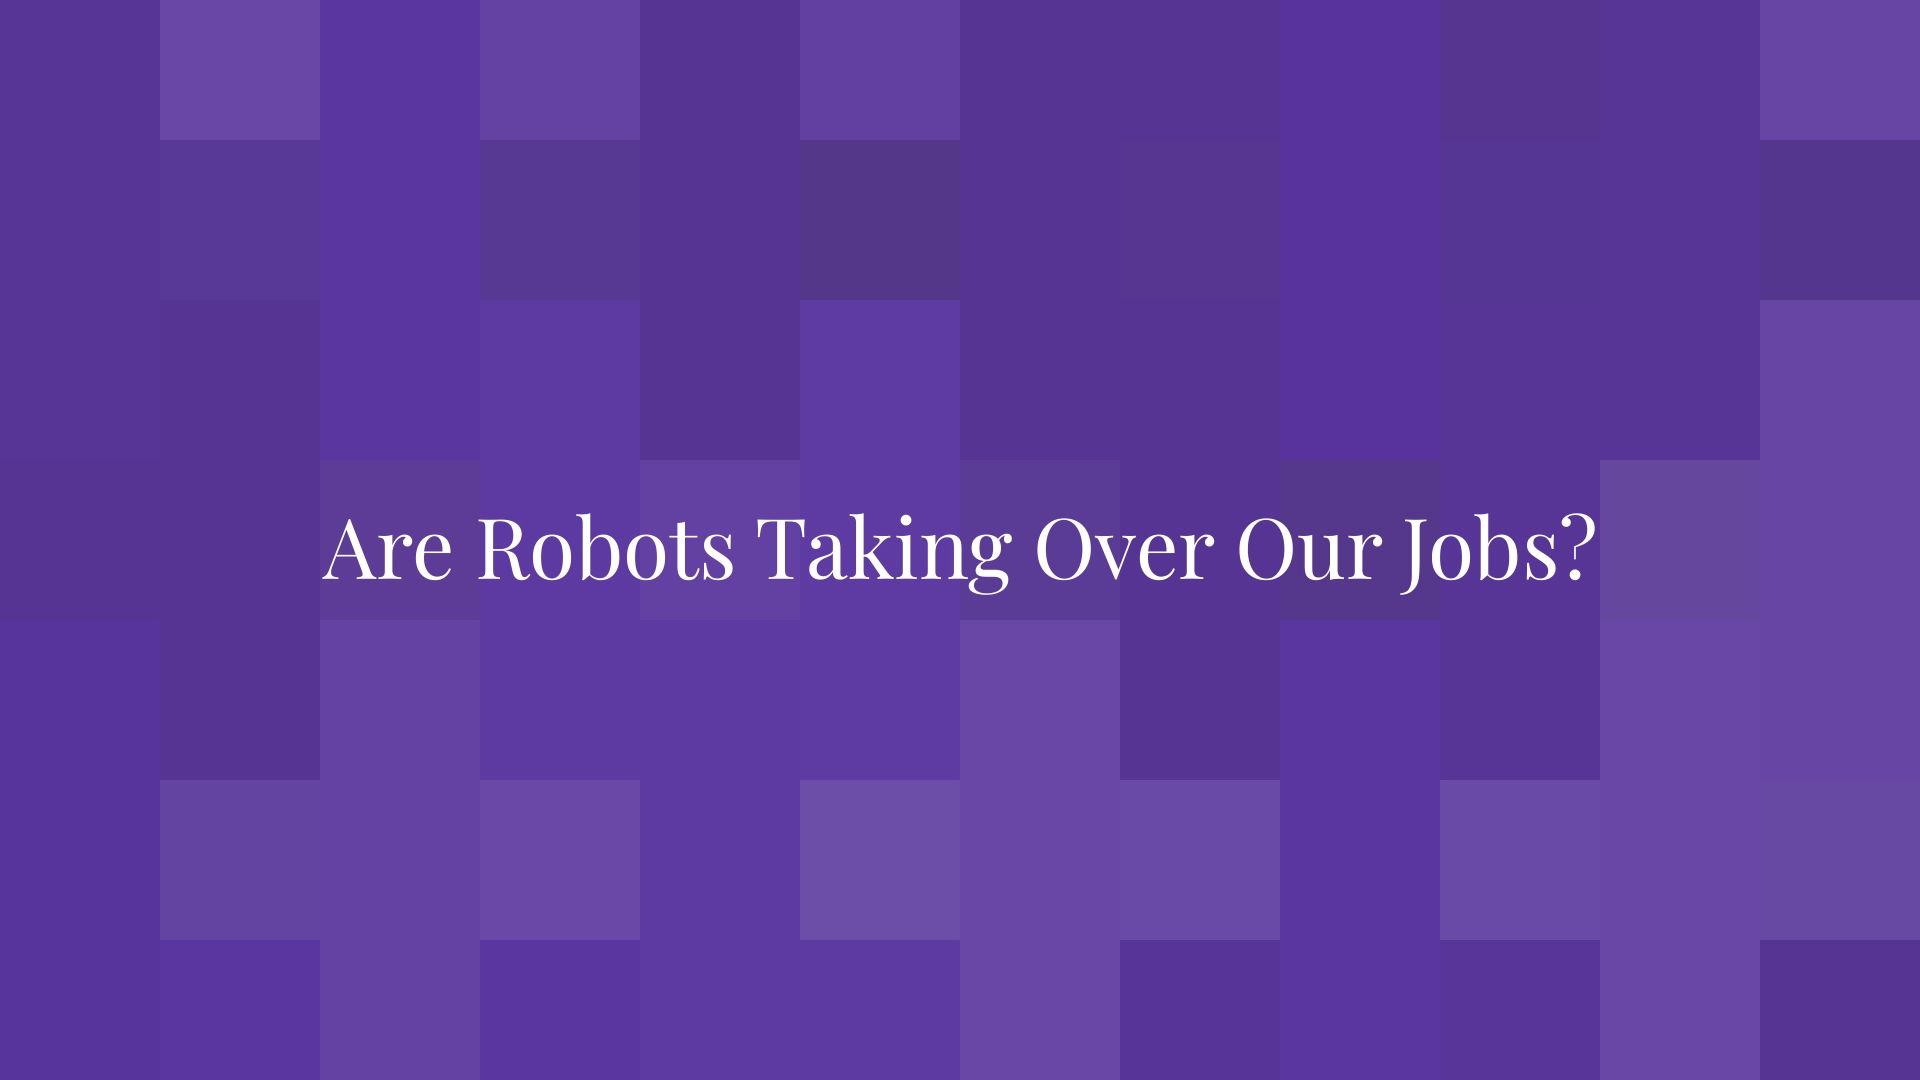 Are Robots Taking Over Our Jobs?